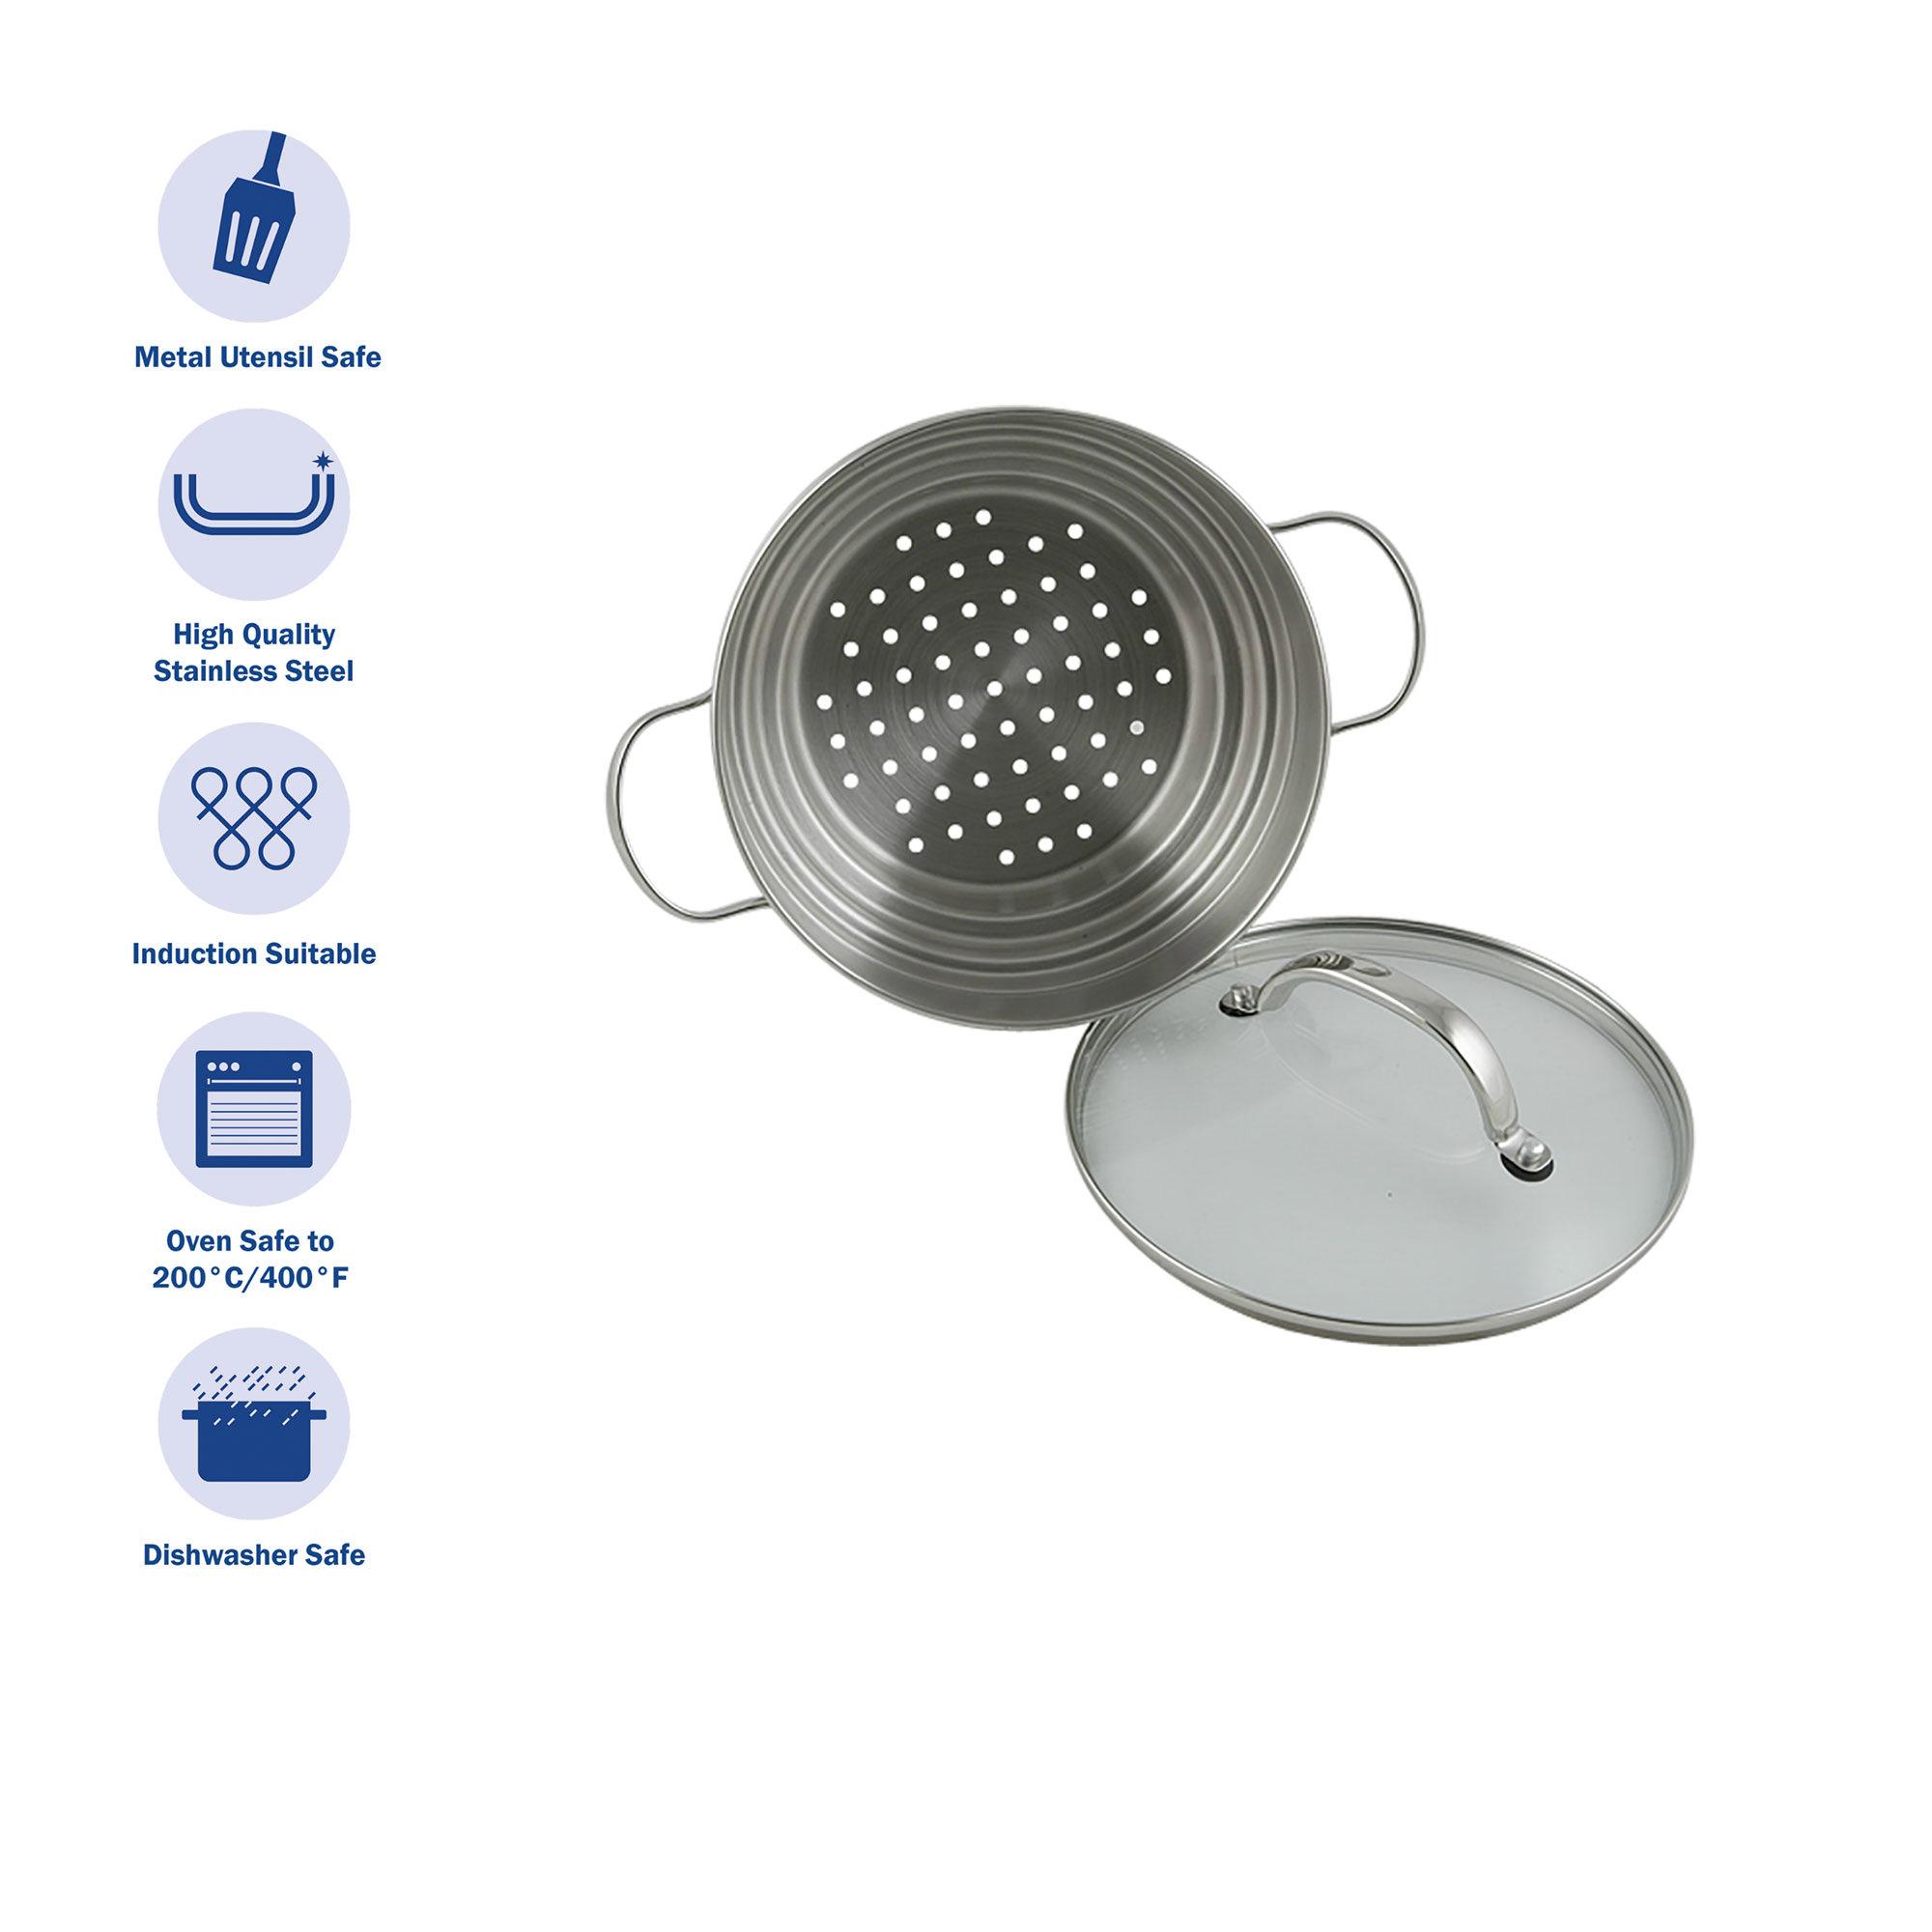 Raco Contemporary Stainless Steel Universal Steamer With Lid Image 3